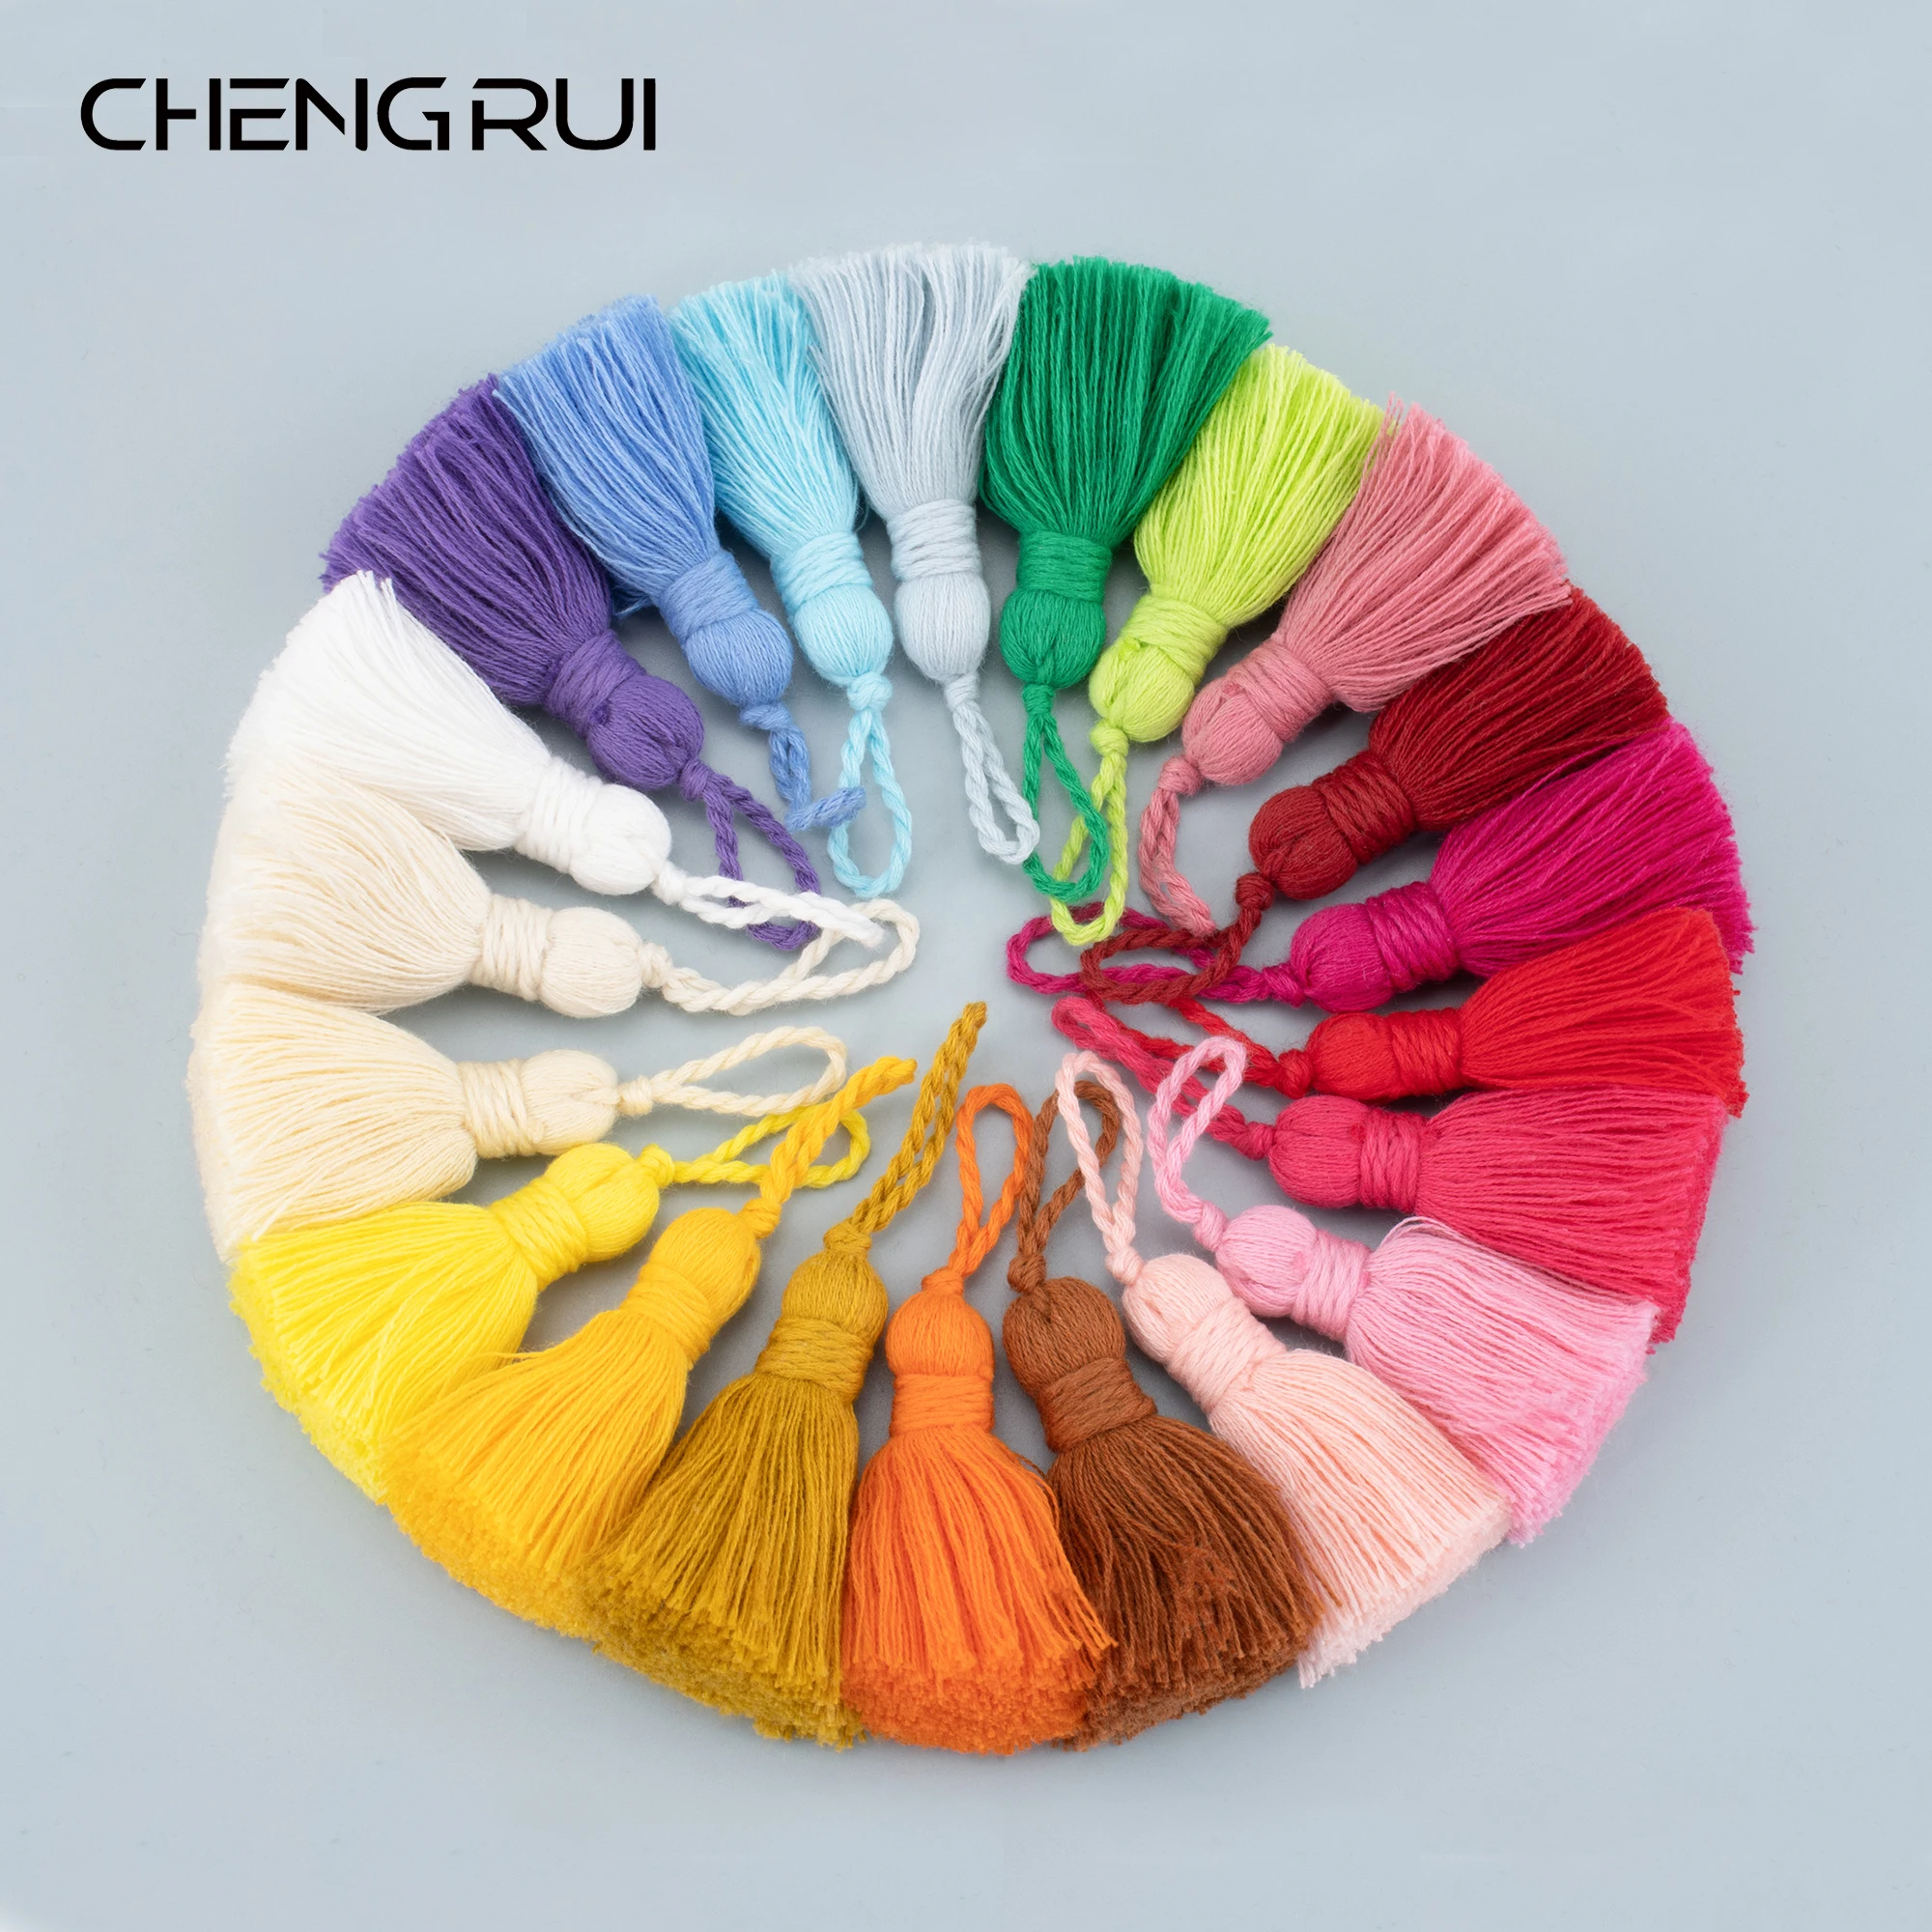 

CHENGRUI L239,5cm,tassel,cotton fringe,Ornament material,hand made,jewelry accessories,earring findings,4pcs/bag